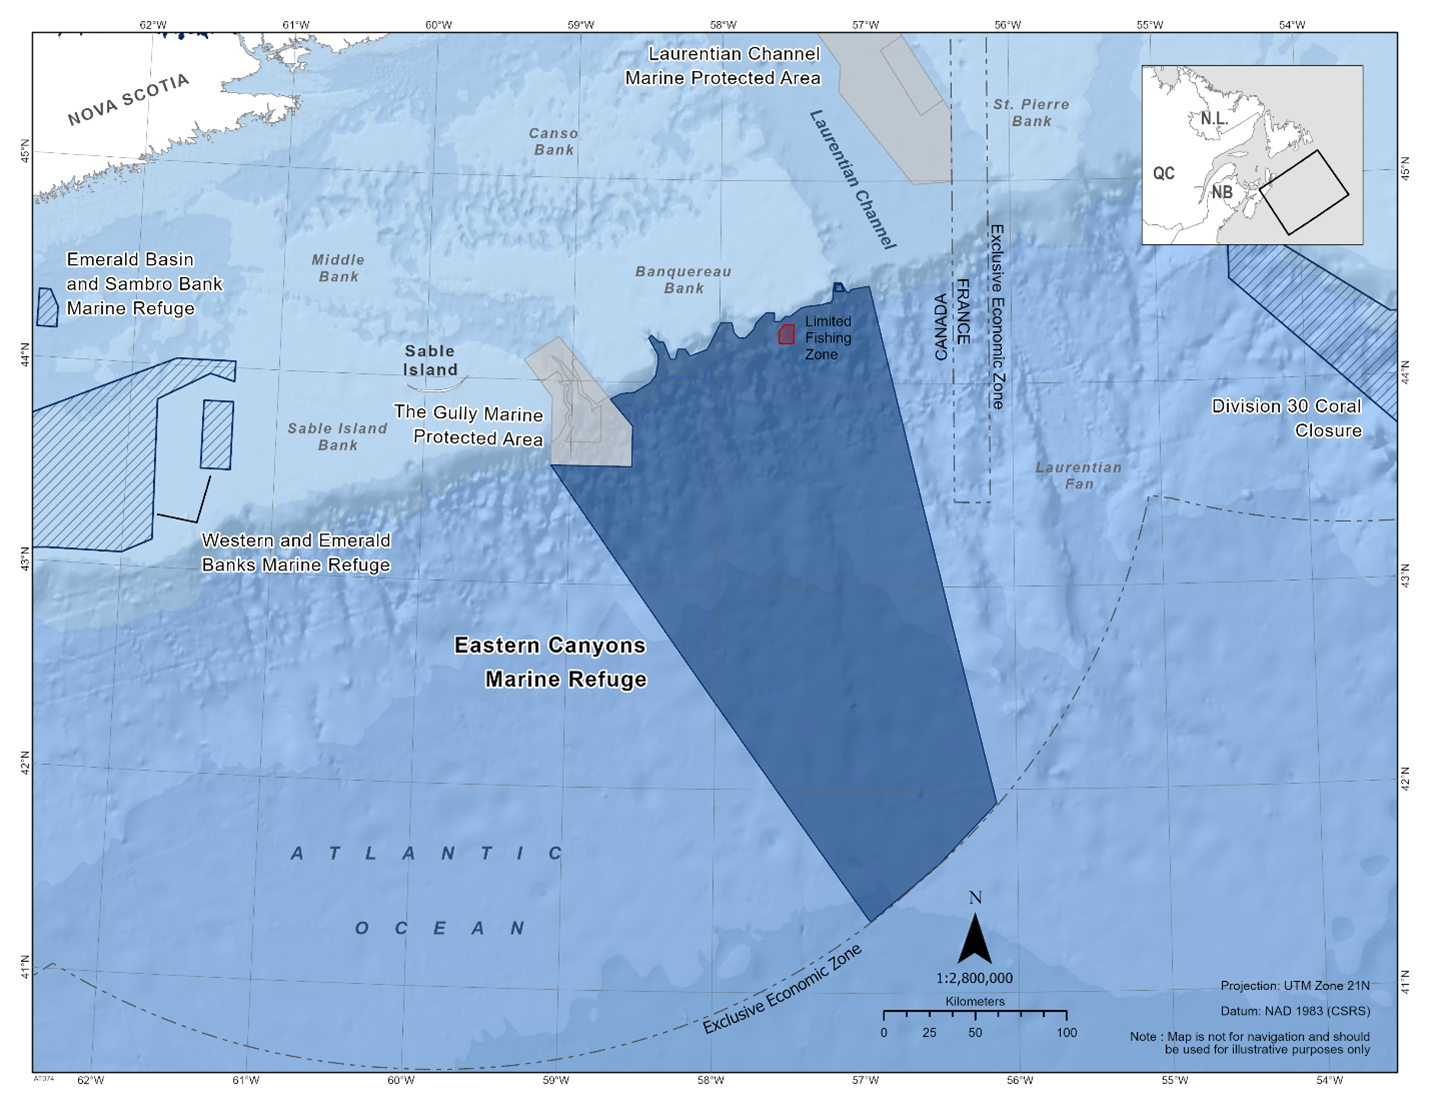 Map of the Eastern Canyons Marine Refuge in dark blue. The map also features other marine refuges nearby with dark blue diagonal lines (Division 3O Coral Closure, Emerald Basin and Sambro Bank Marine Refuge, Western and Emerald Banks Marine Refuge). 